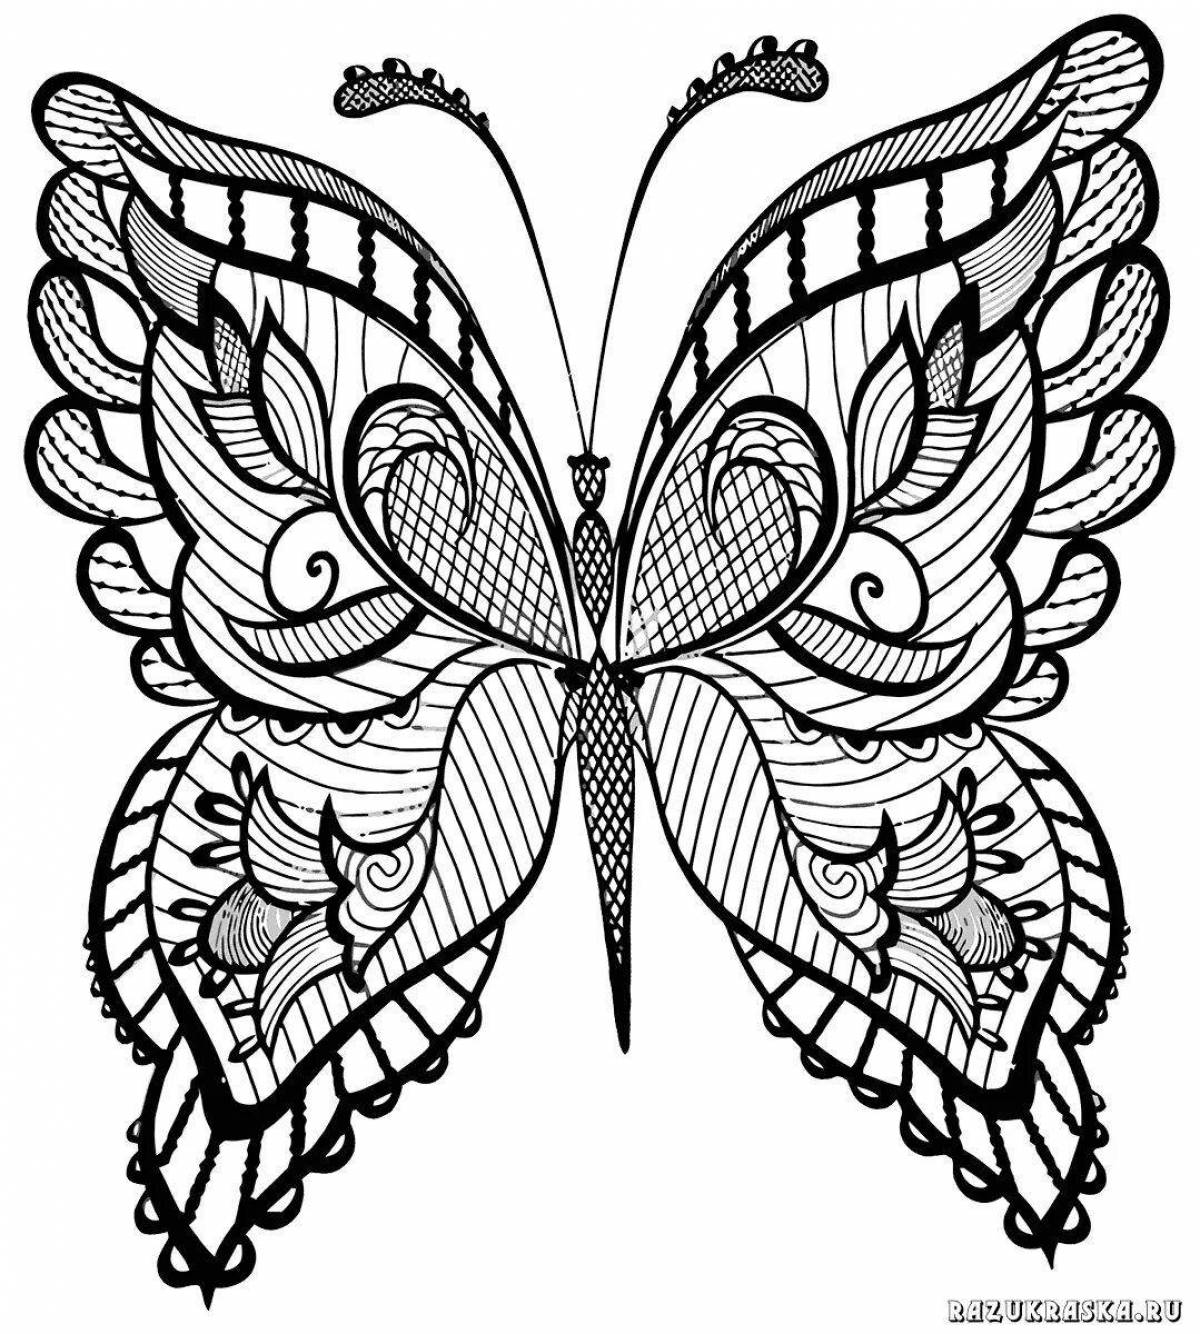 Serene coloring page is very pretty and light